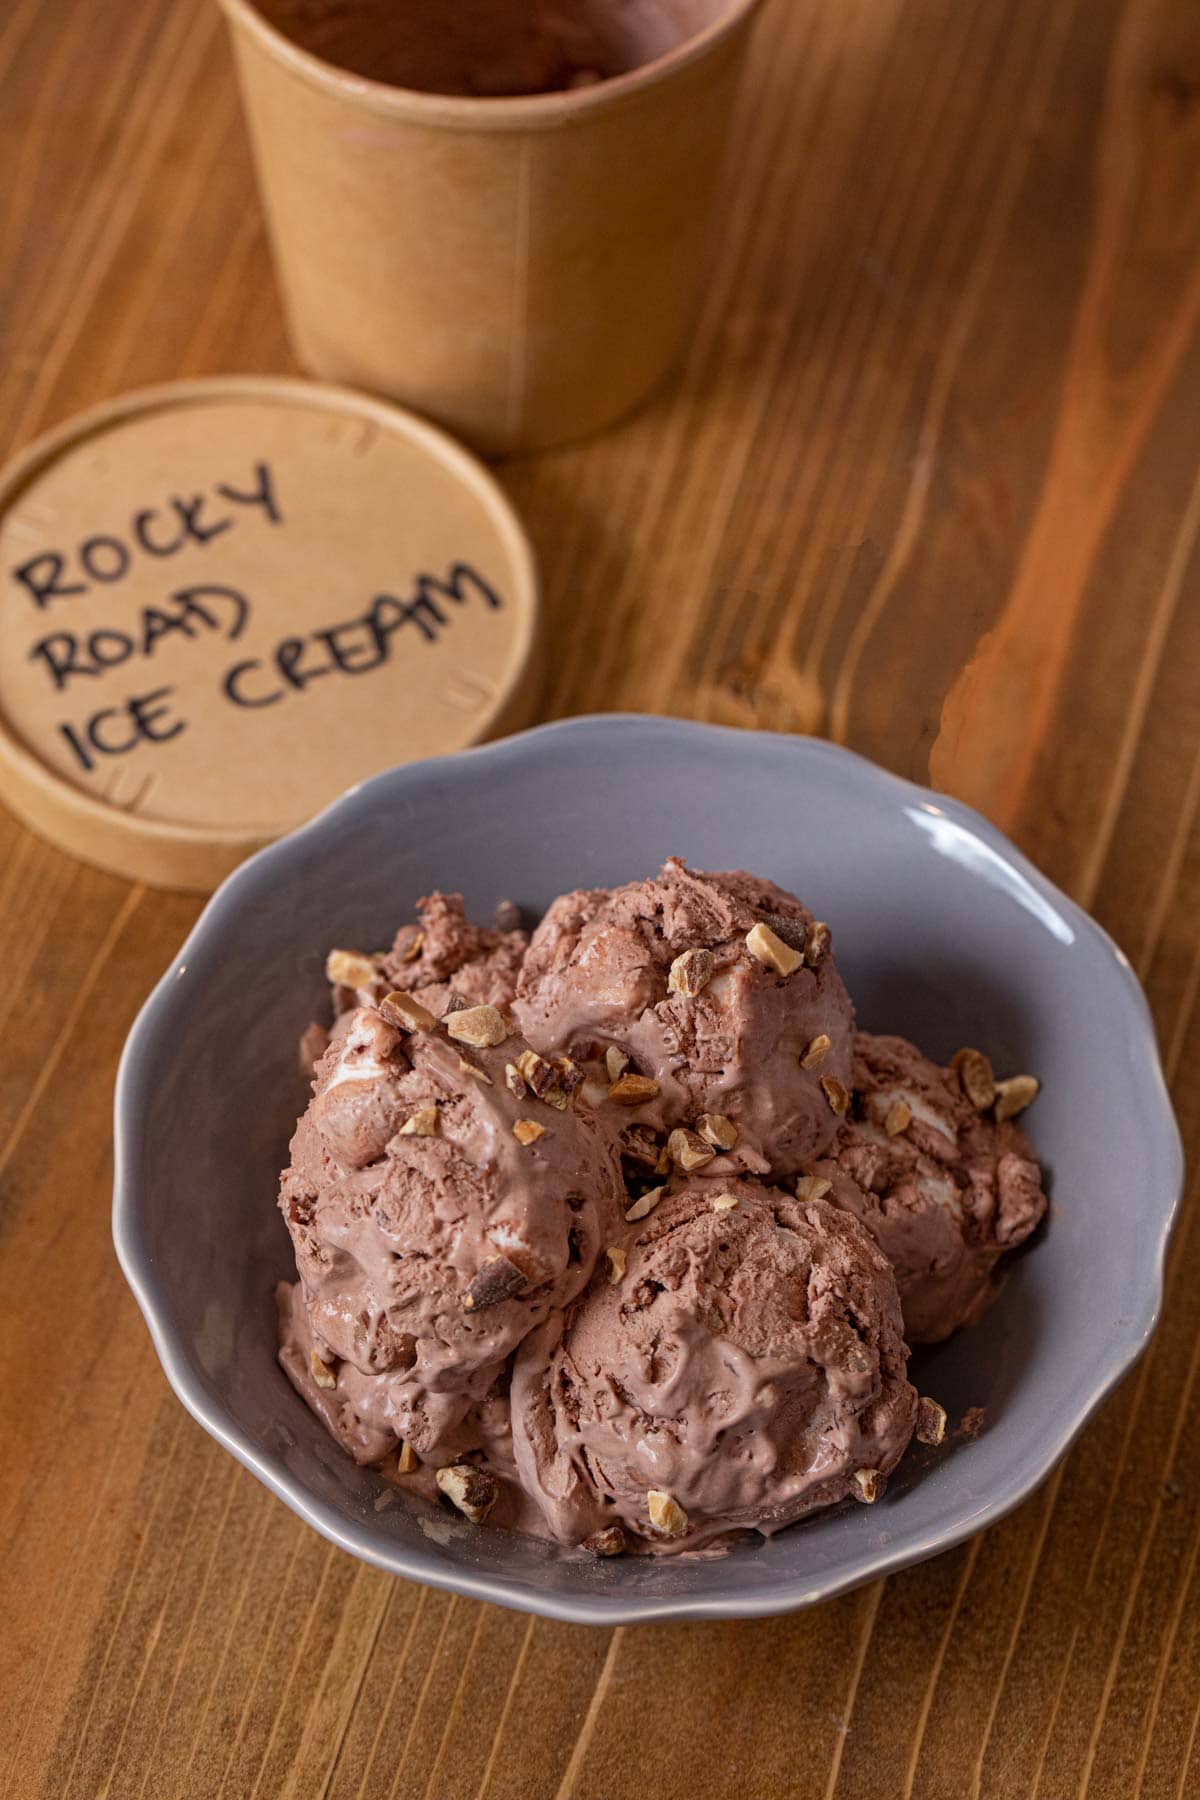 Rocky Road Ice Cream scoops in bowl